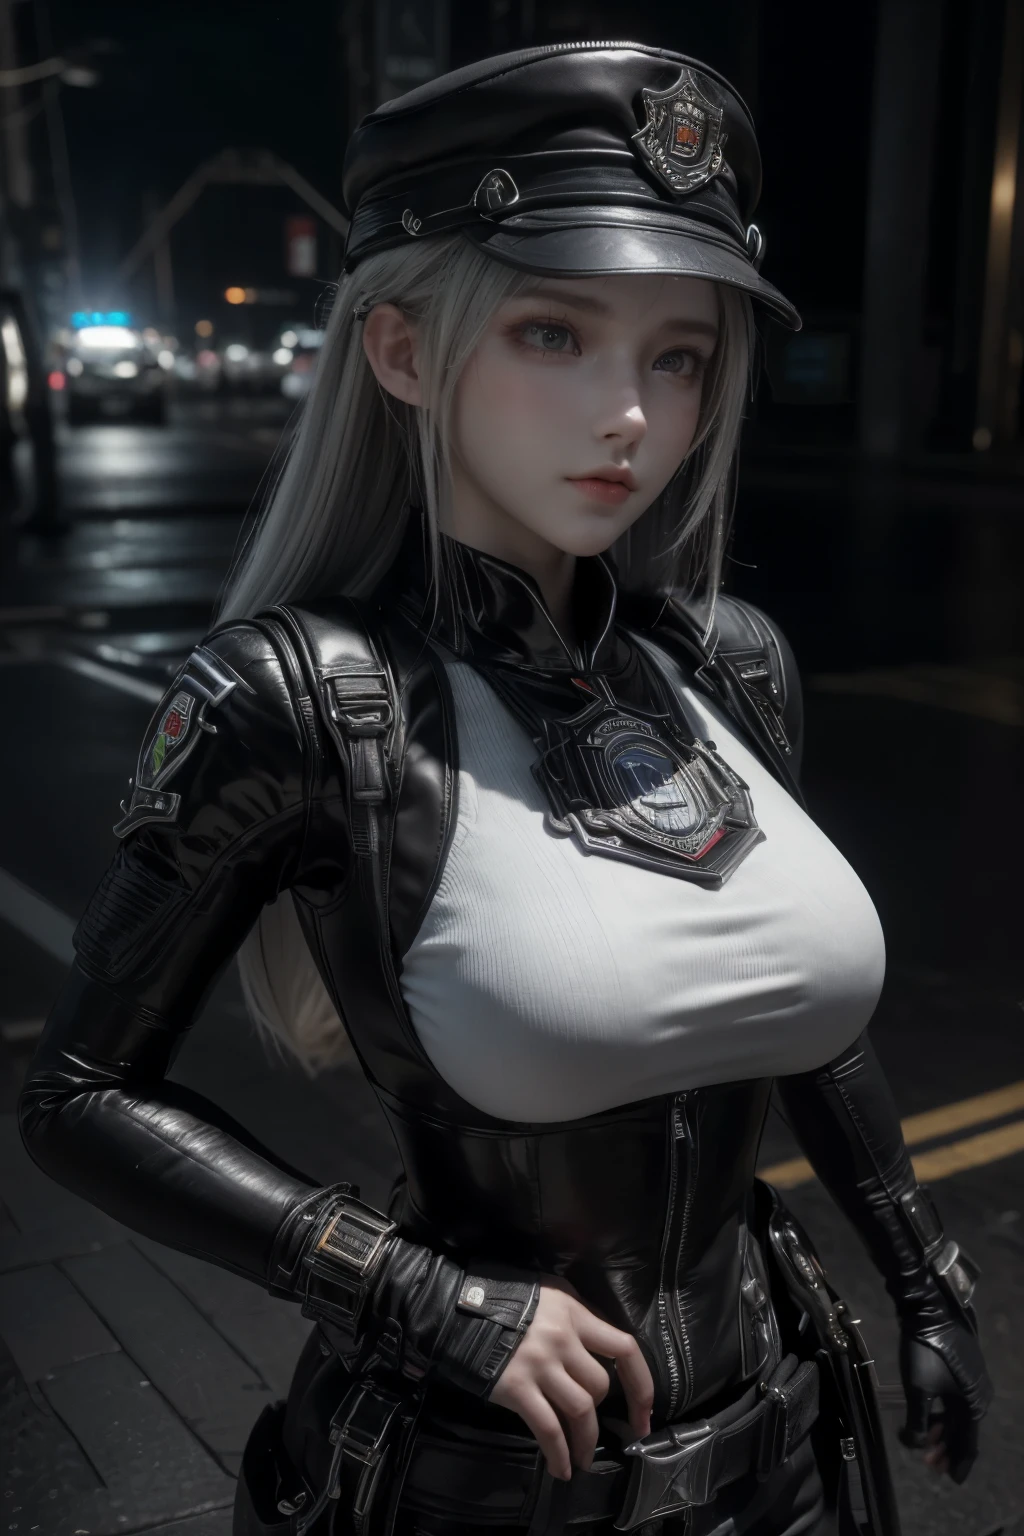 Masterpiece,Game art,The best picture quality,Highest resolution,8K,(A bust photograph),(Portrait),(Head close-up),(Rule of thirds),Unreal Engine 5 rendering works,
20 year old girl,Future World Police,Short hair details,With long bangs,(Short White Hair,Fiery red eyes),(Large, full breasts),(Wearing an unassigned SWAT uniform,A very fine police hat,police badge,Accessories for police operations),Mouth smile,Elegant and charming,Noble and gentle,(Dynamic posture),A top-down view,The neon city of night,
Movie lights，Ray tracing，Game CG，((3D Unreal Engine))，OC rendering reflection pattern